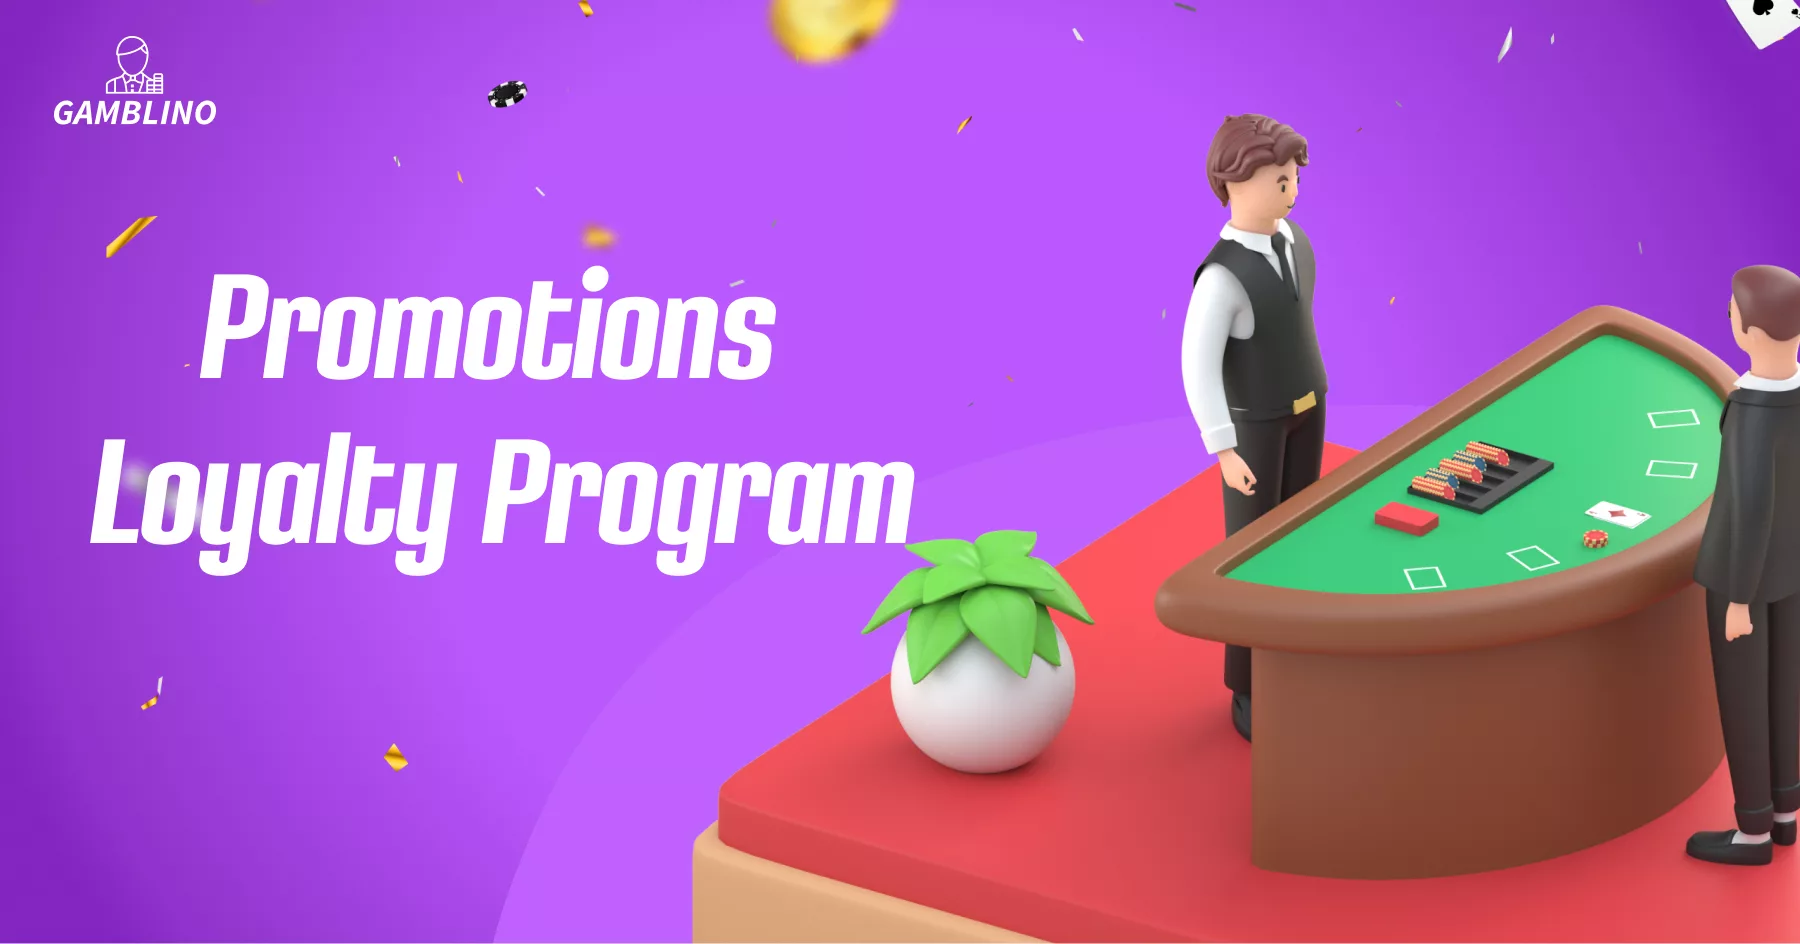 Promotion and 3d character playing a casino game to build Loyalty Program